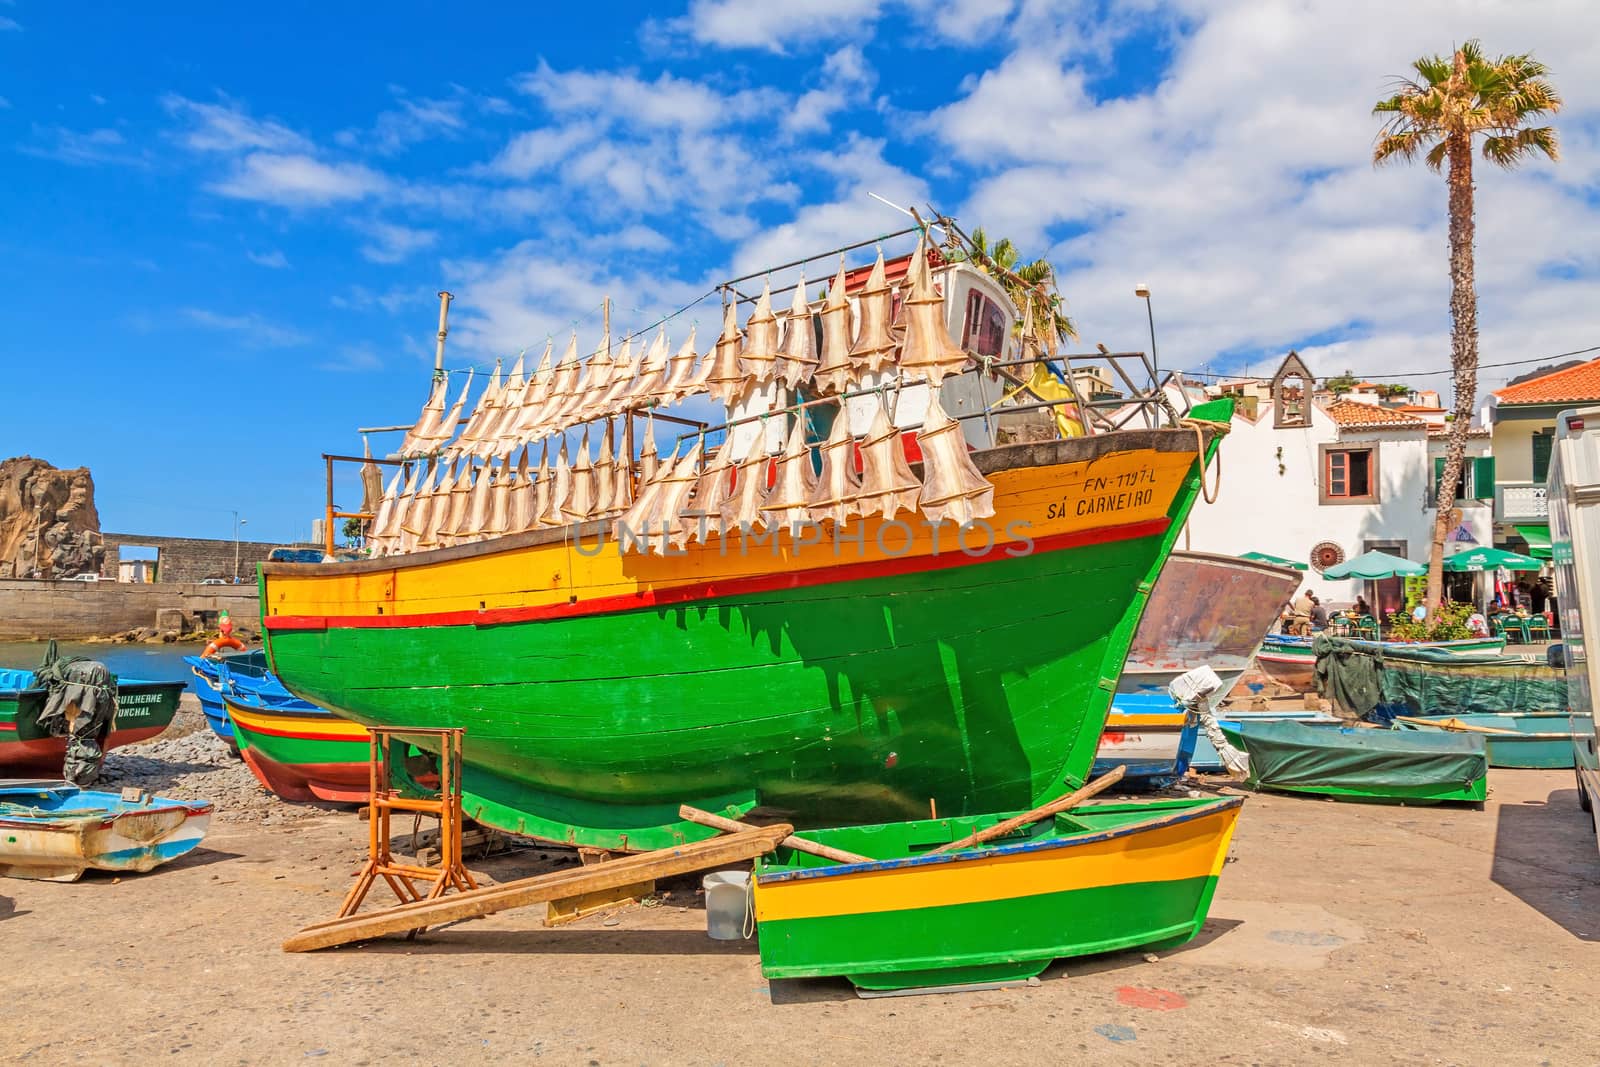 Camara de Lobos, Madeira - June 8, 2013: Cat shark drying at colorful fishing boat in port of the town. Typical for this region on Madeira island.